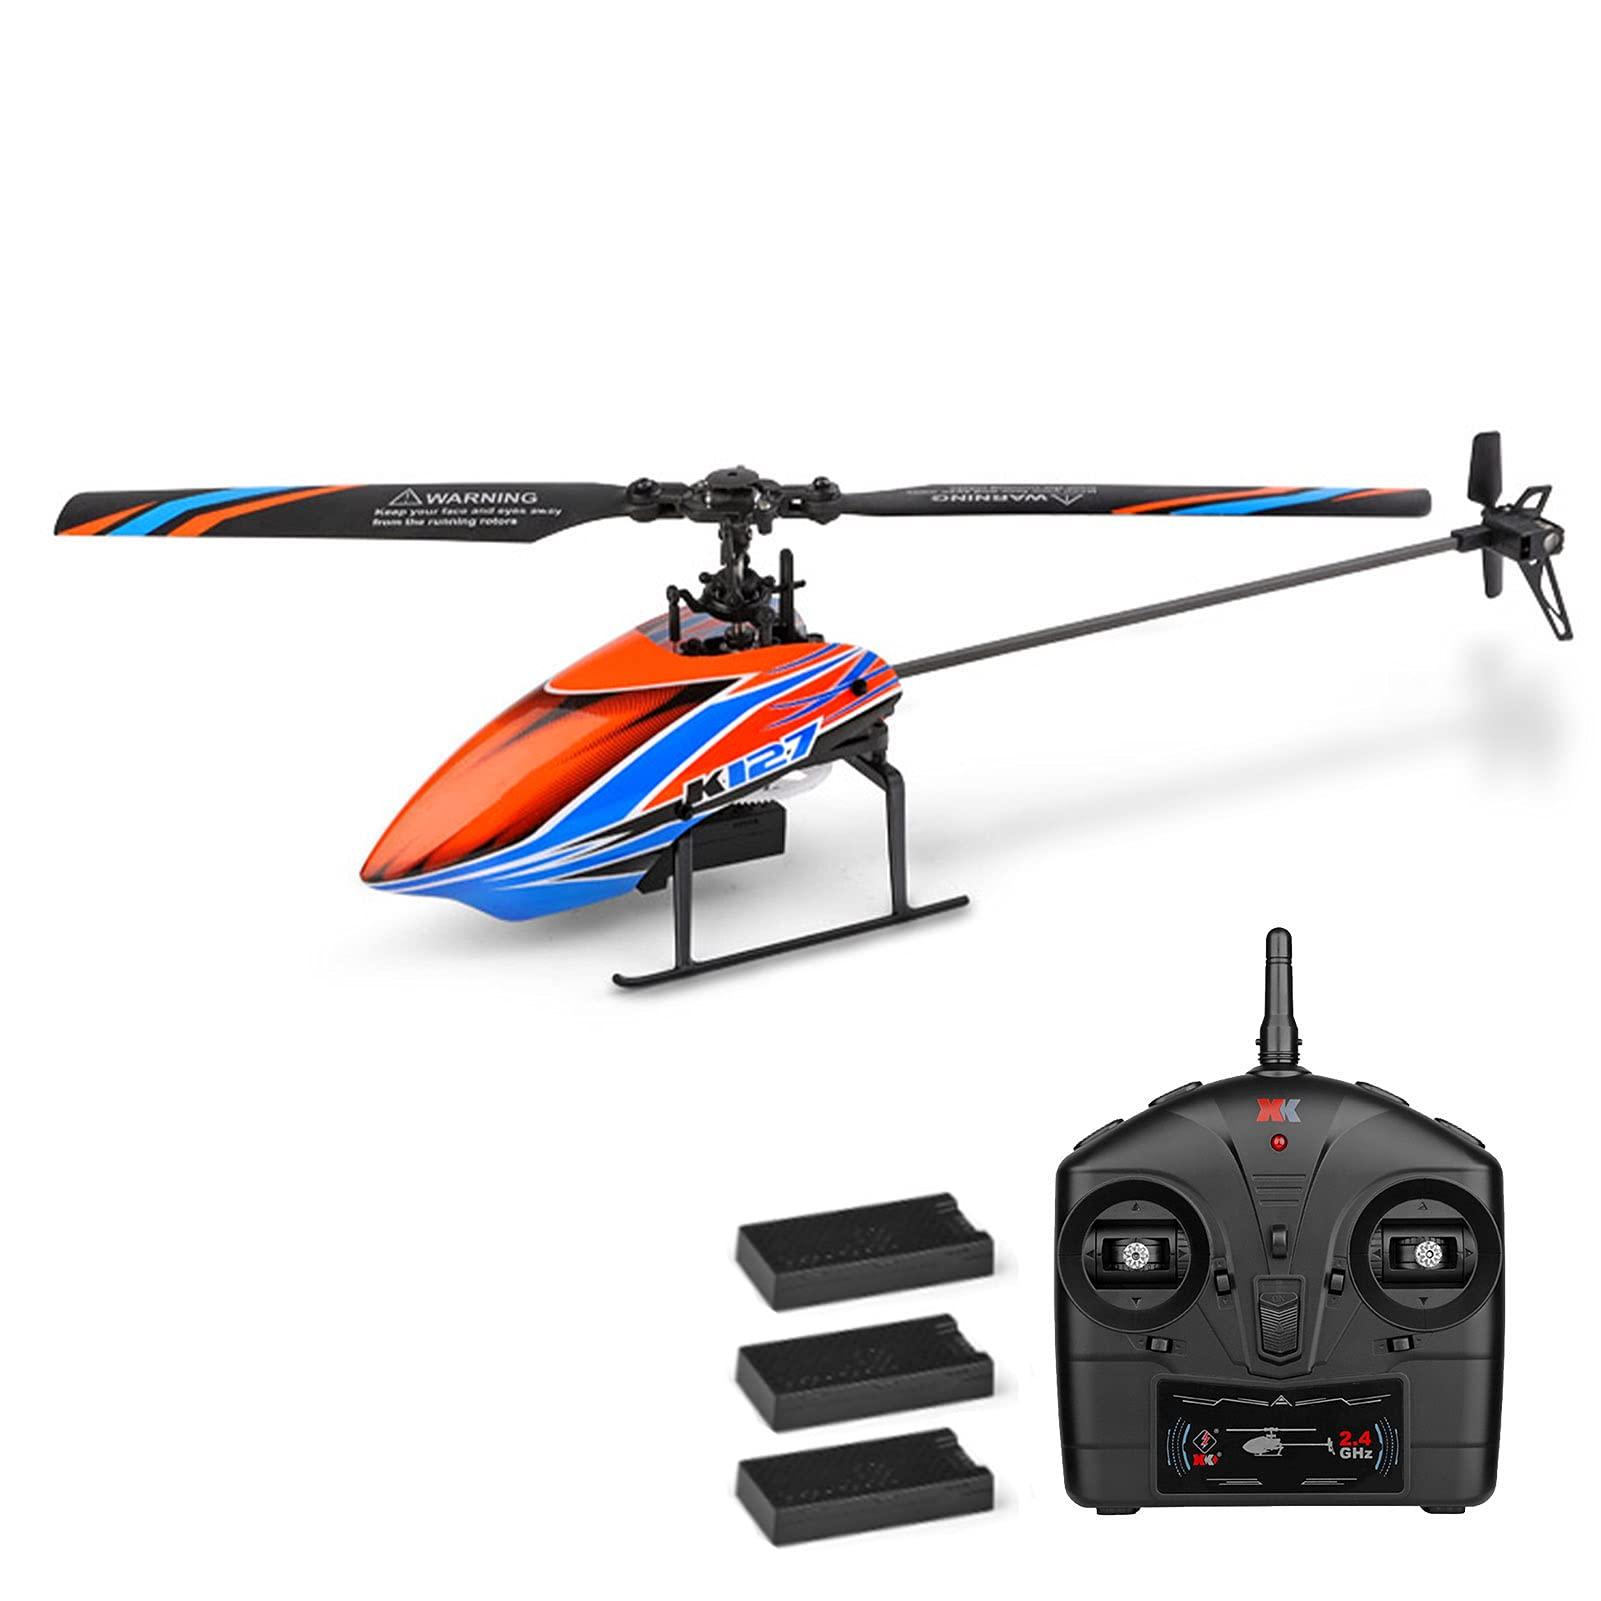 Rc Cyclone Helicopter: Compact and High-Performance Design for Ultimate Indoor Flying Fun!